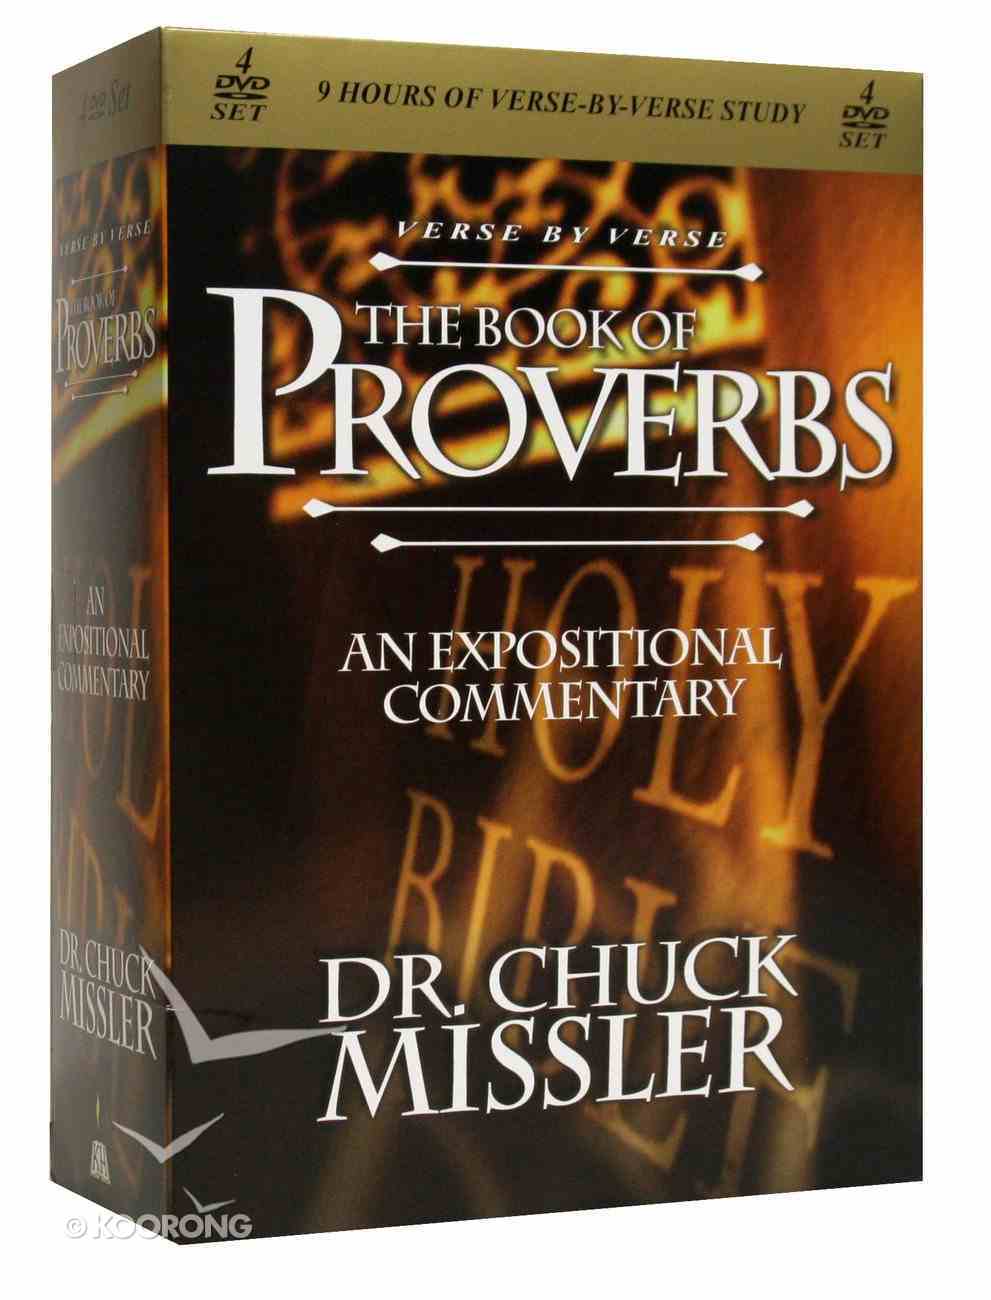 Proverbs Commentary DVD